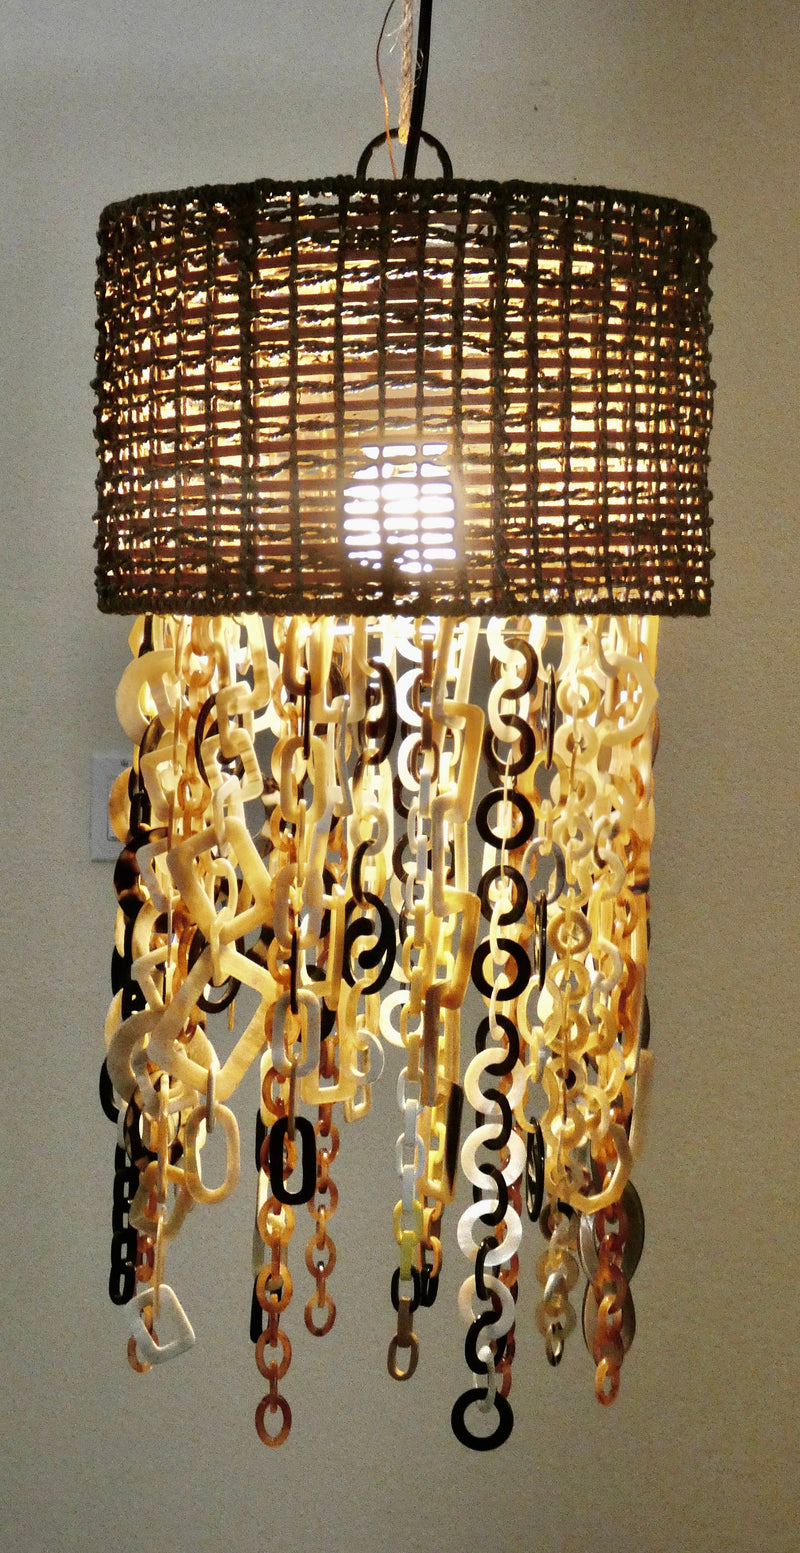 Rattan Boho Style Pendant Lamp, One of a Kind Hanging Light, Bohemian Style with Lucite Fringe accent